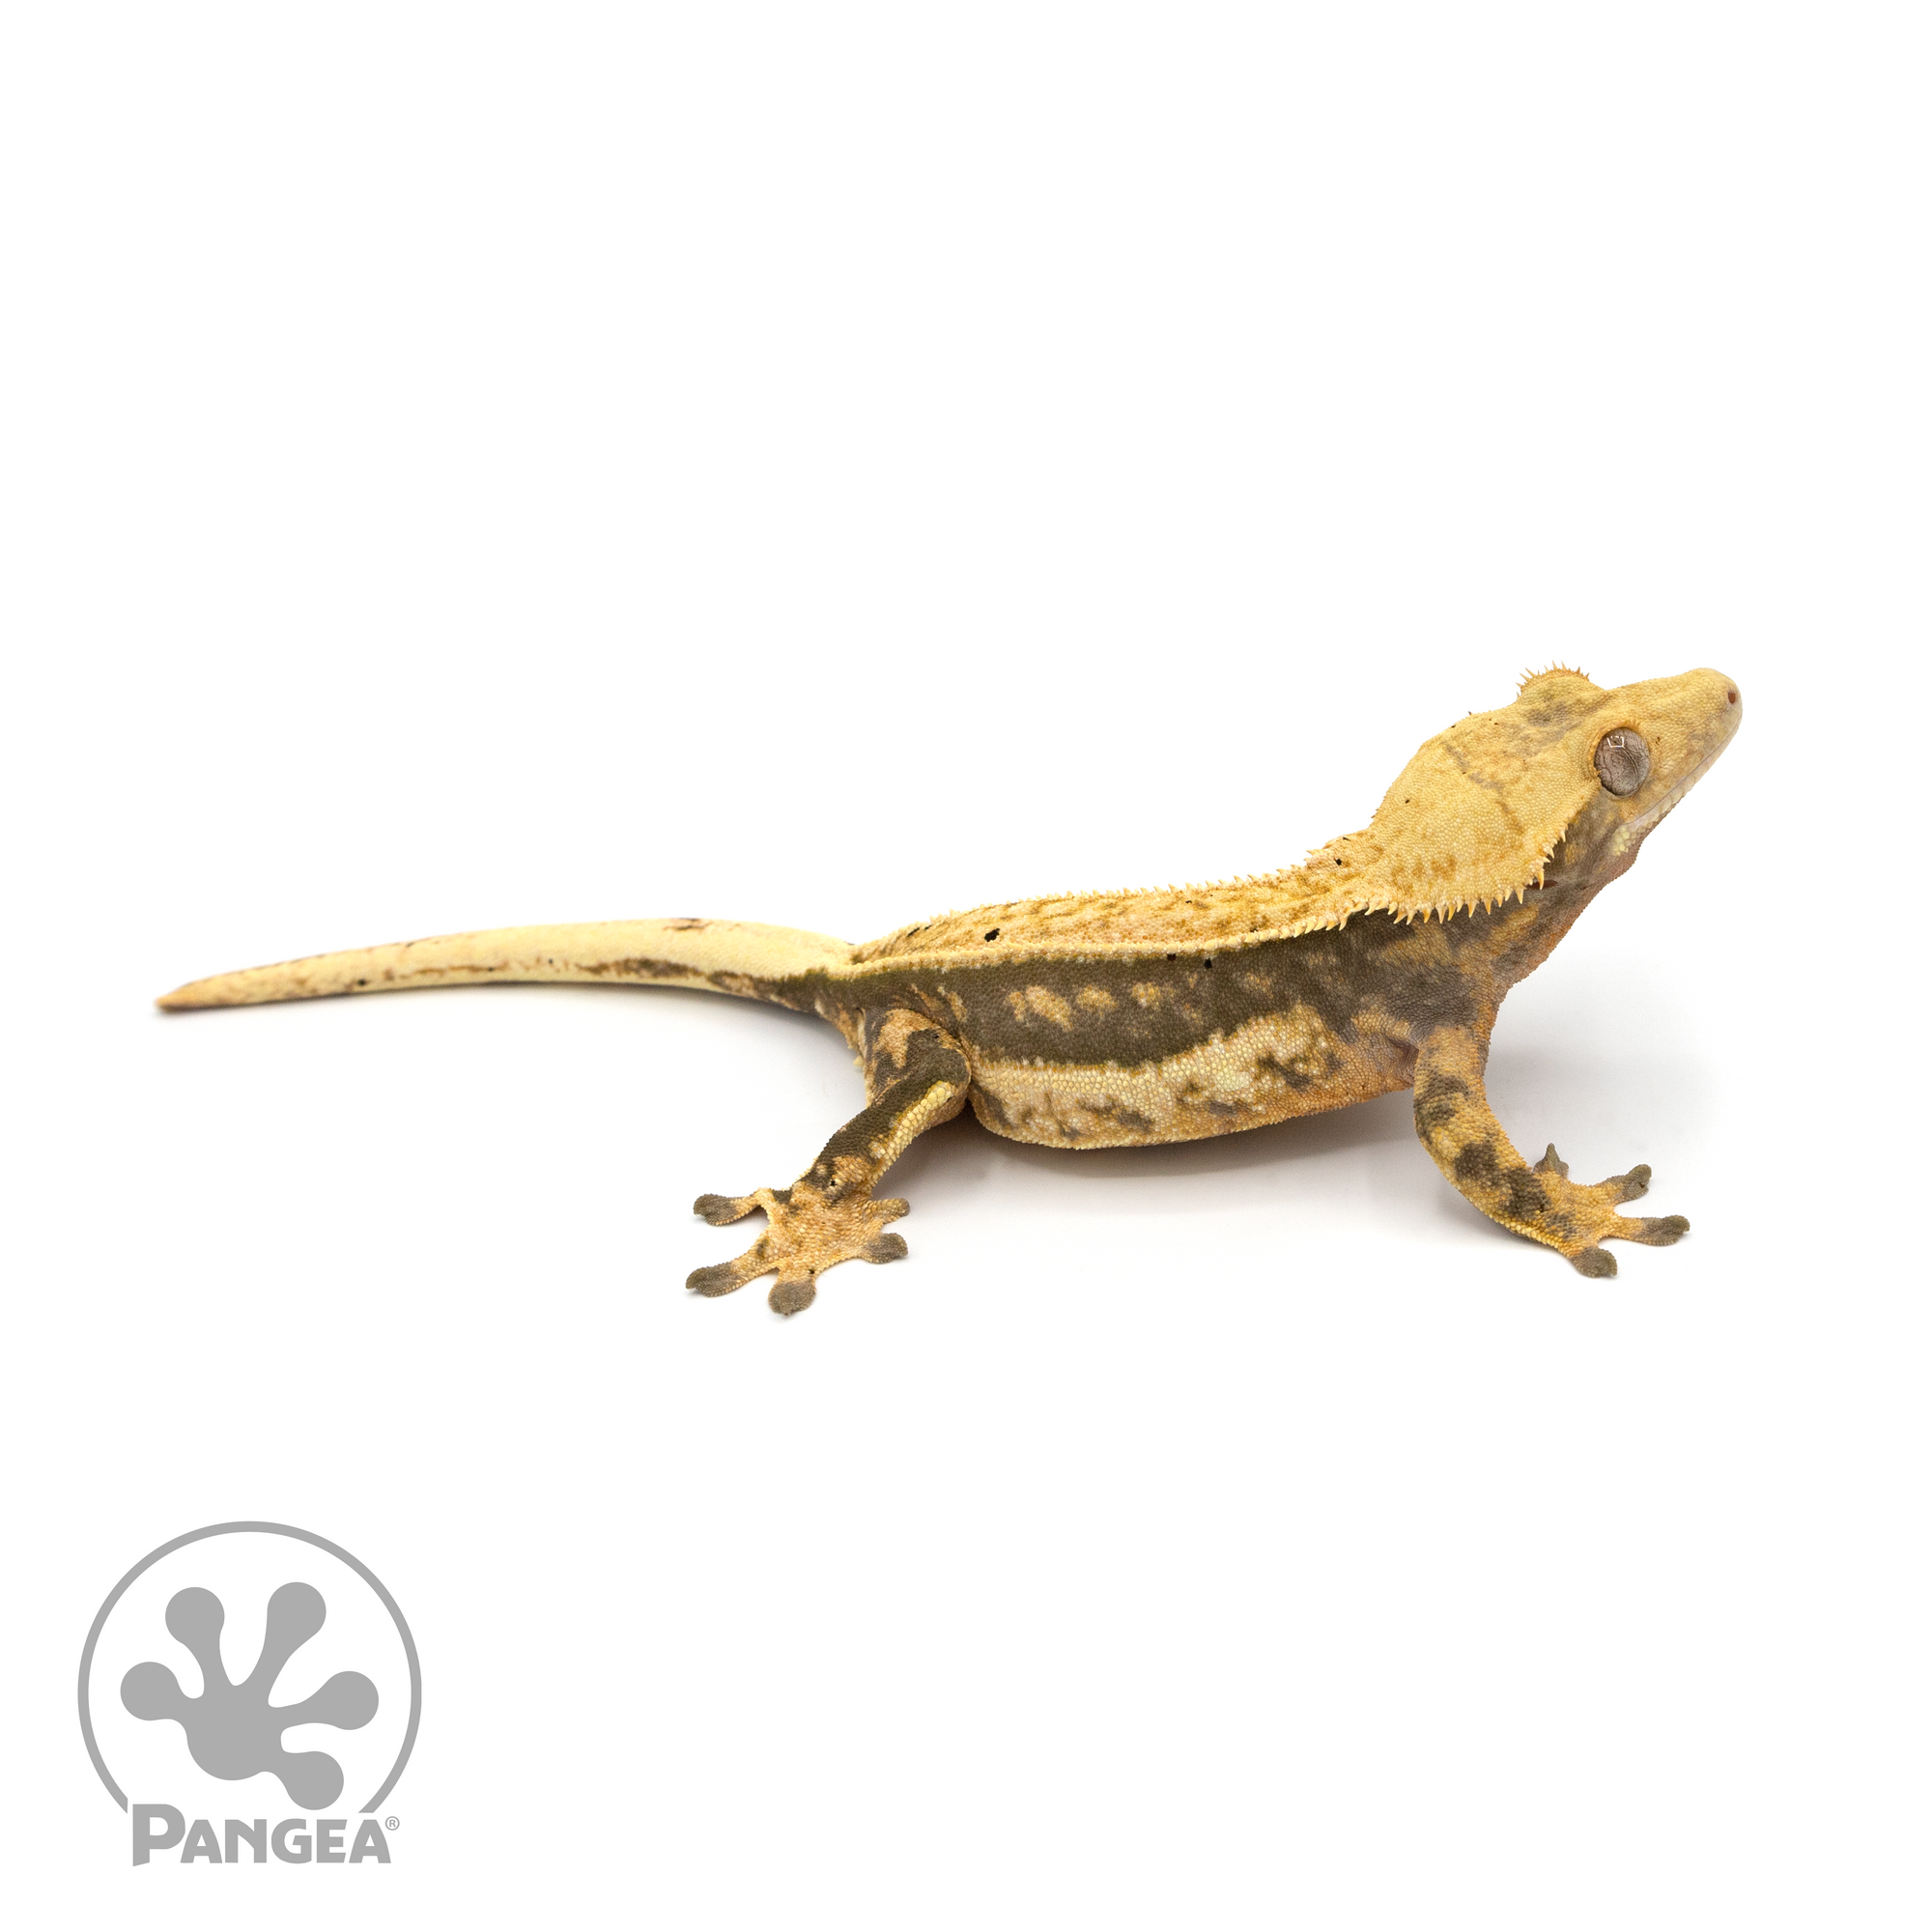 Female Quad Pinstripe  Crested Gecko Cr-1139 looking right